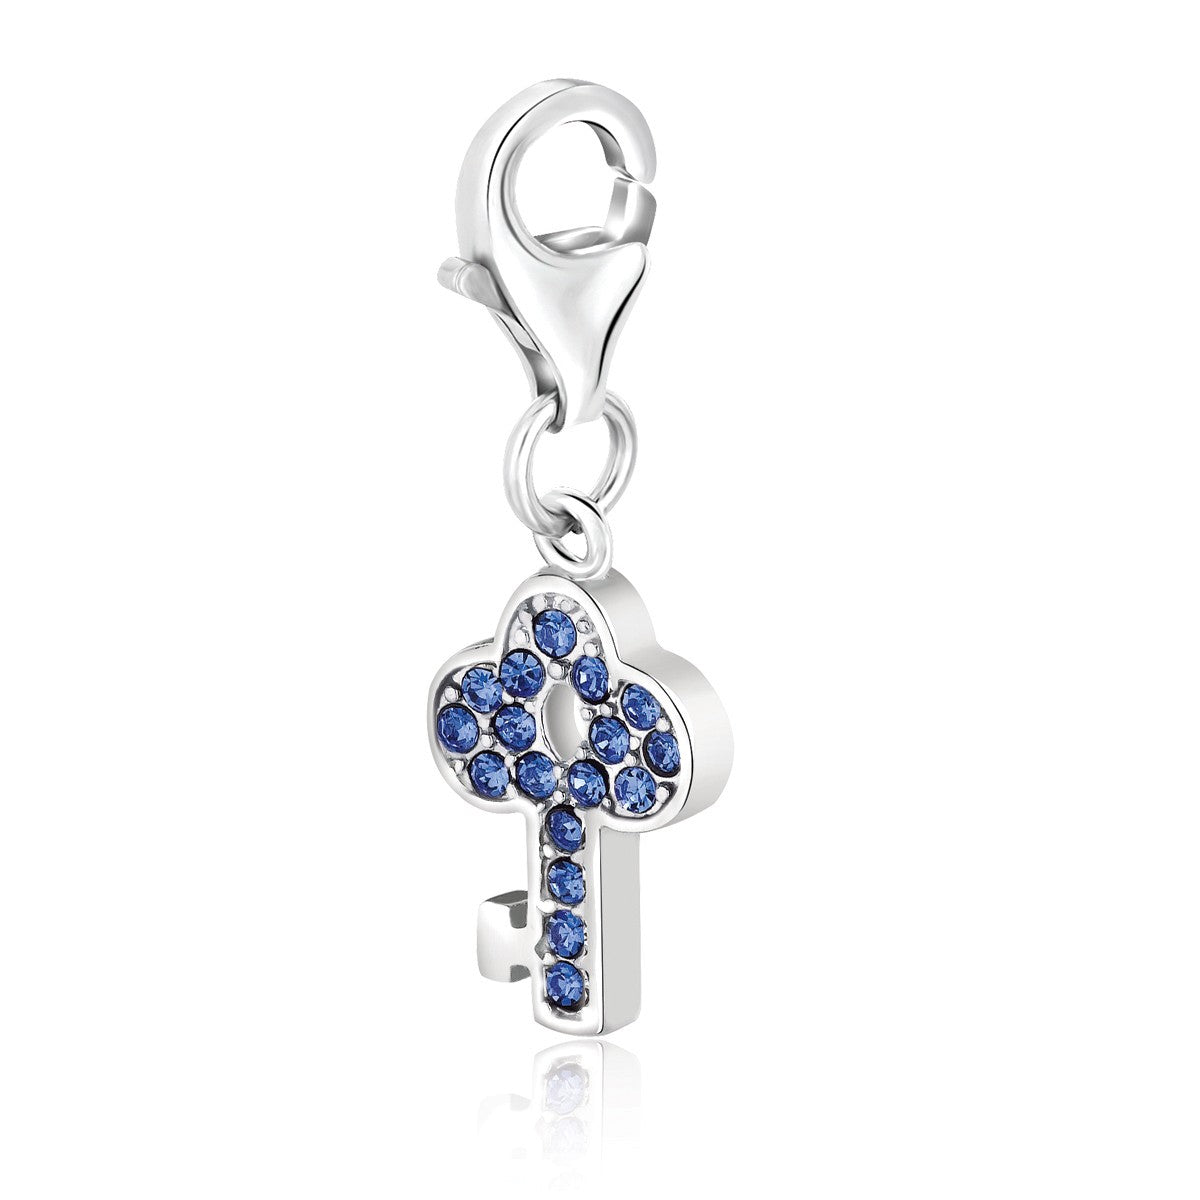 Sterling Silver Key Charm with Blue Tone Crystal Embellishments